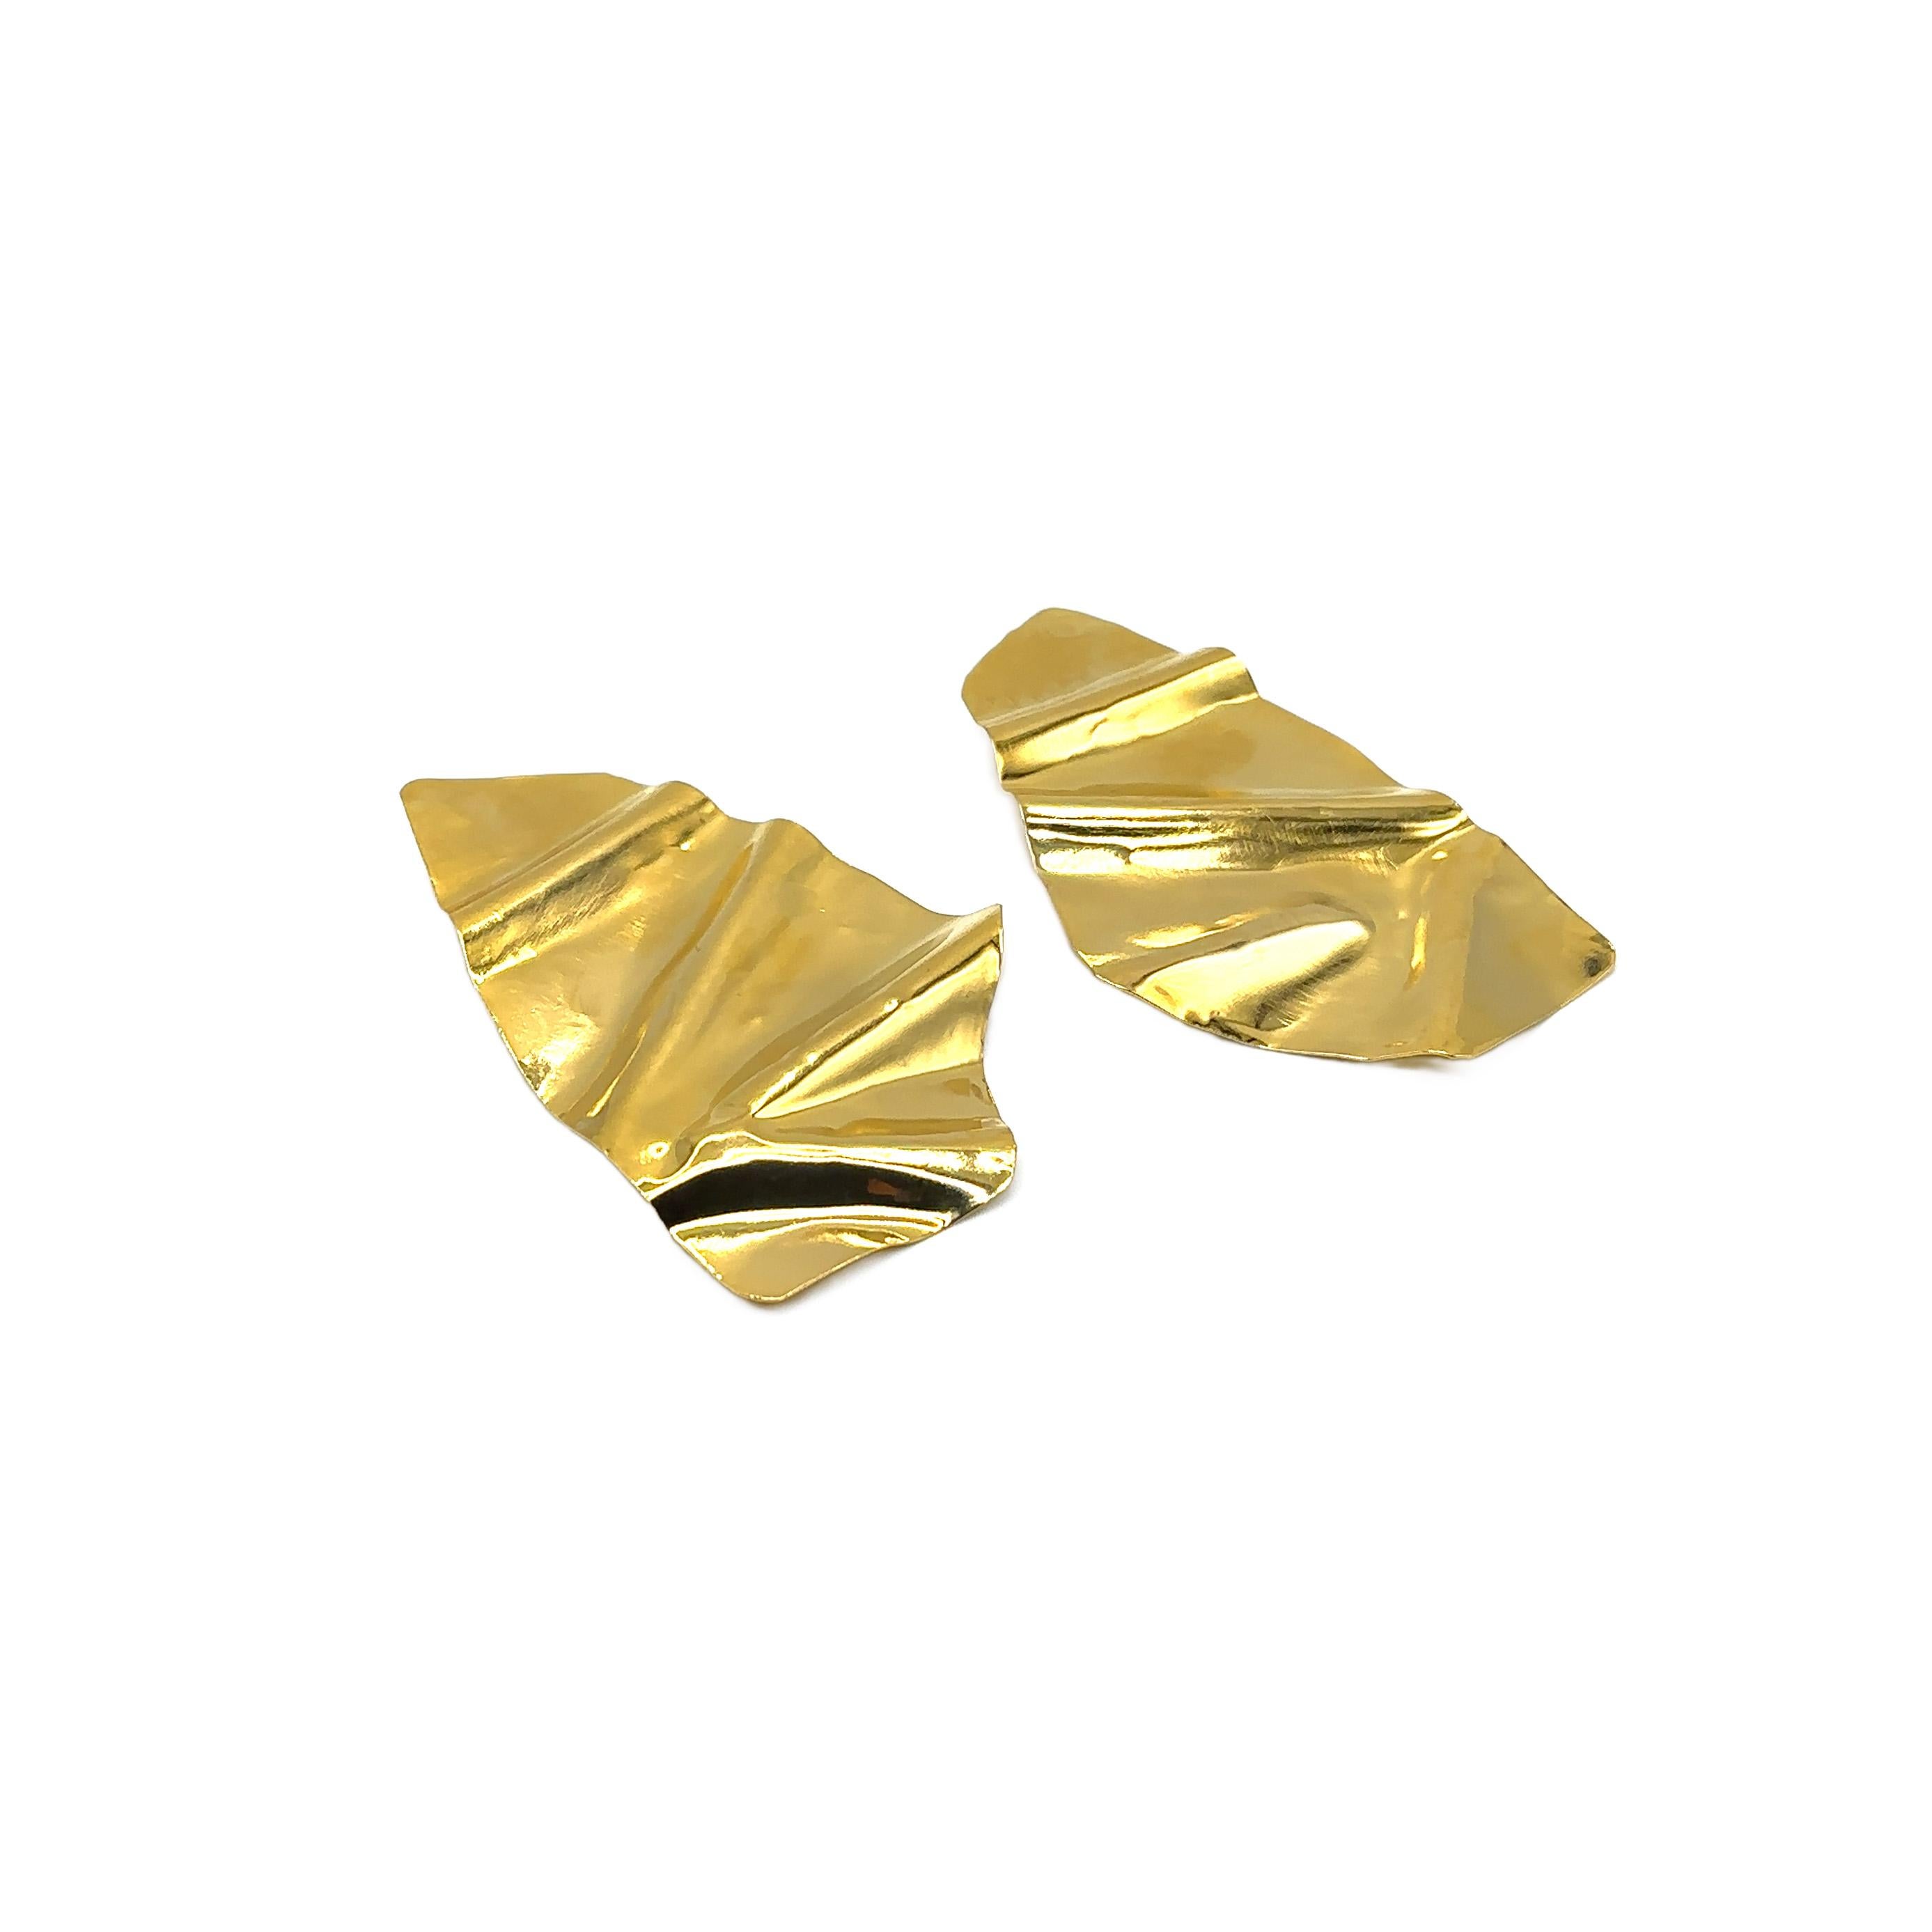 From refined, timeless shapes to modern characters with edge meet CONSTANZA - handcrafted and shape may vary slightly making pieces one of a kind Material 14K Gold Plated
